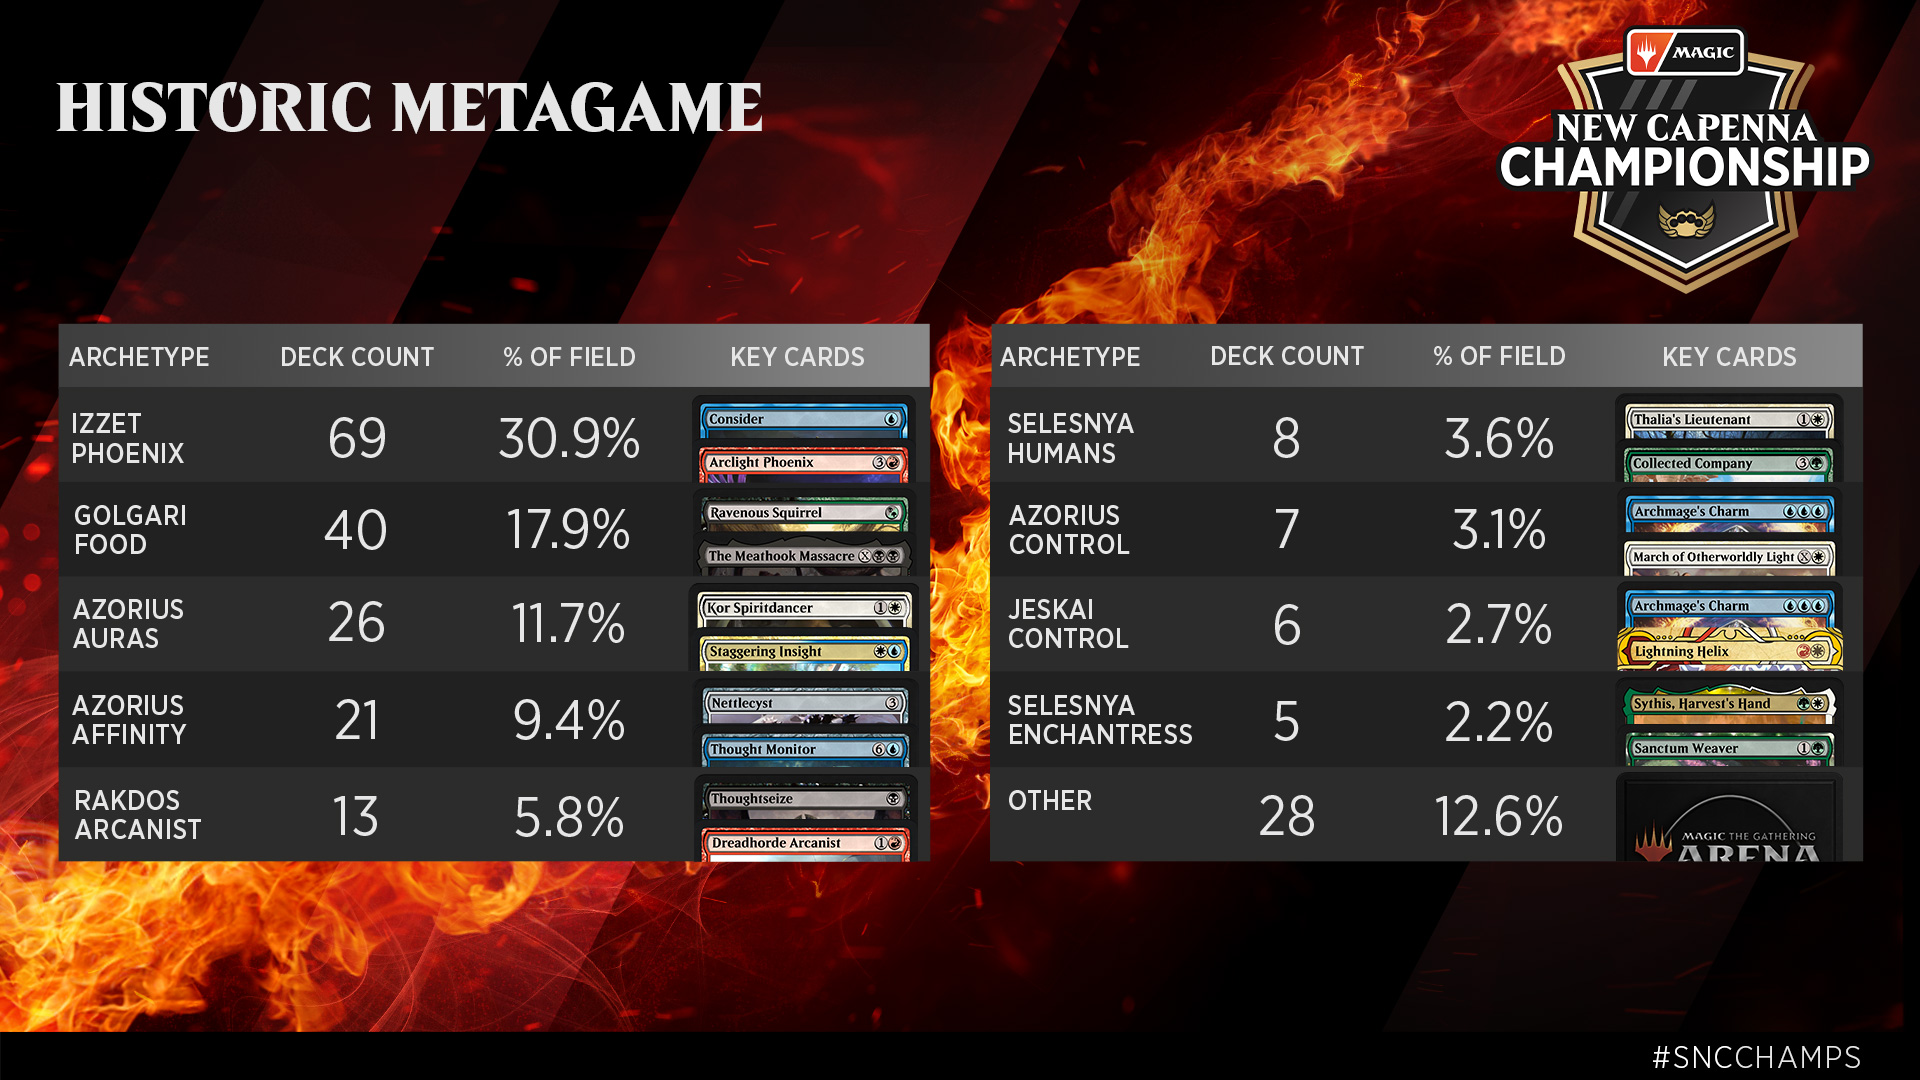 Magic the Gathering Arena Live Player Count and Statistics